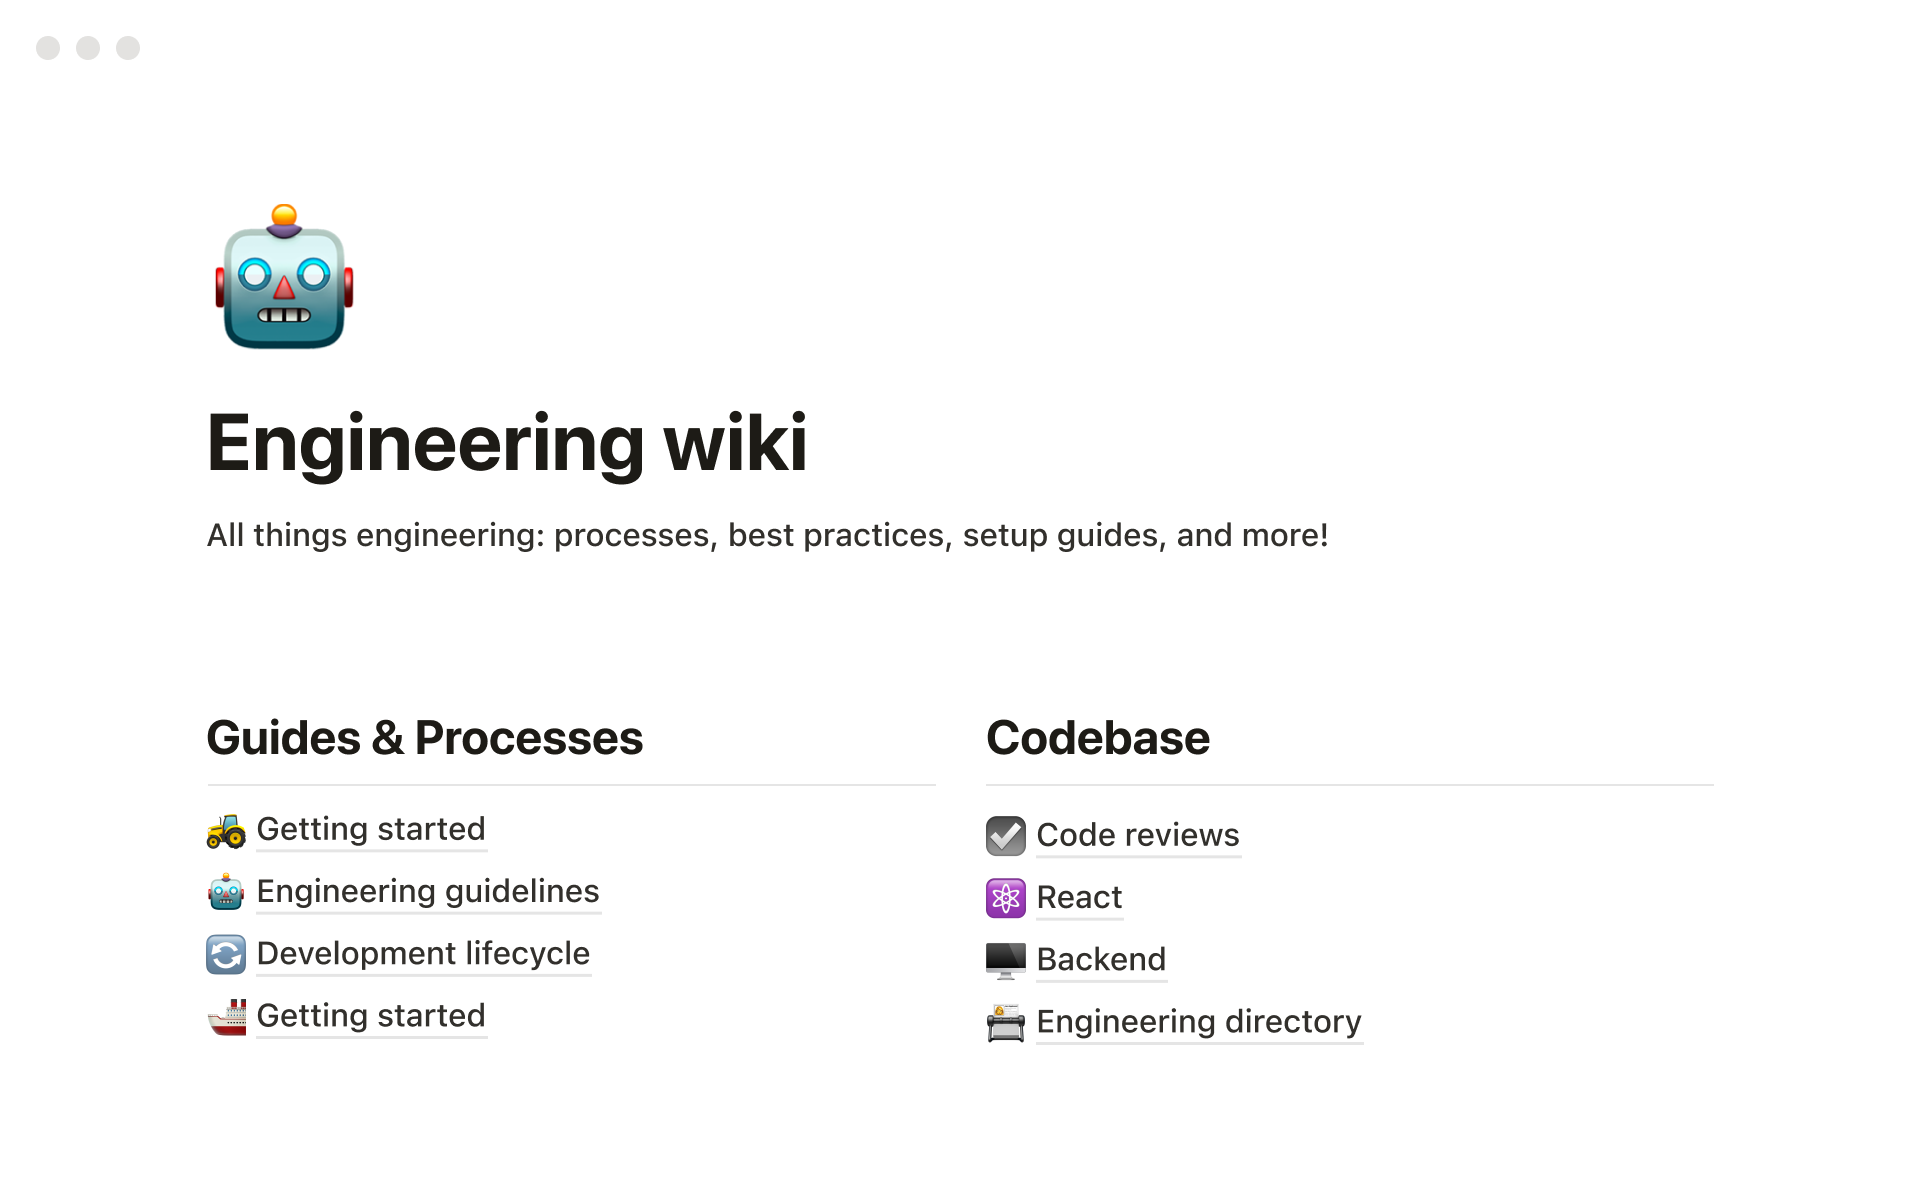 Can You Create a Wikipedia Page for Your Company? [Best Practices &  Guidelines to Know]